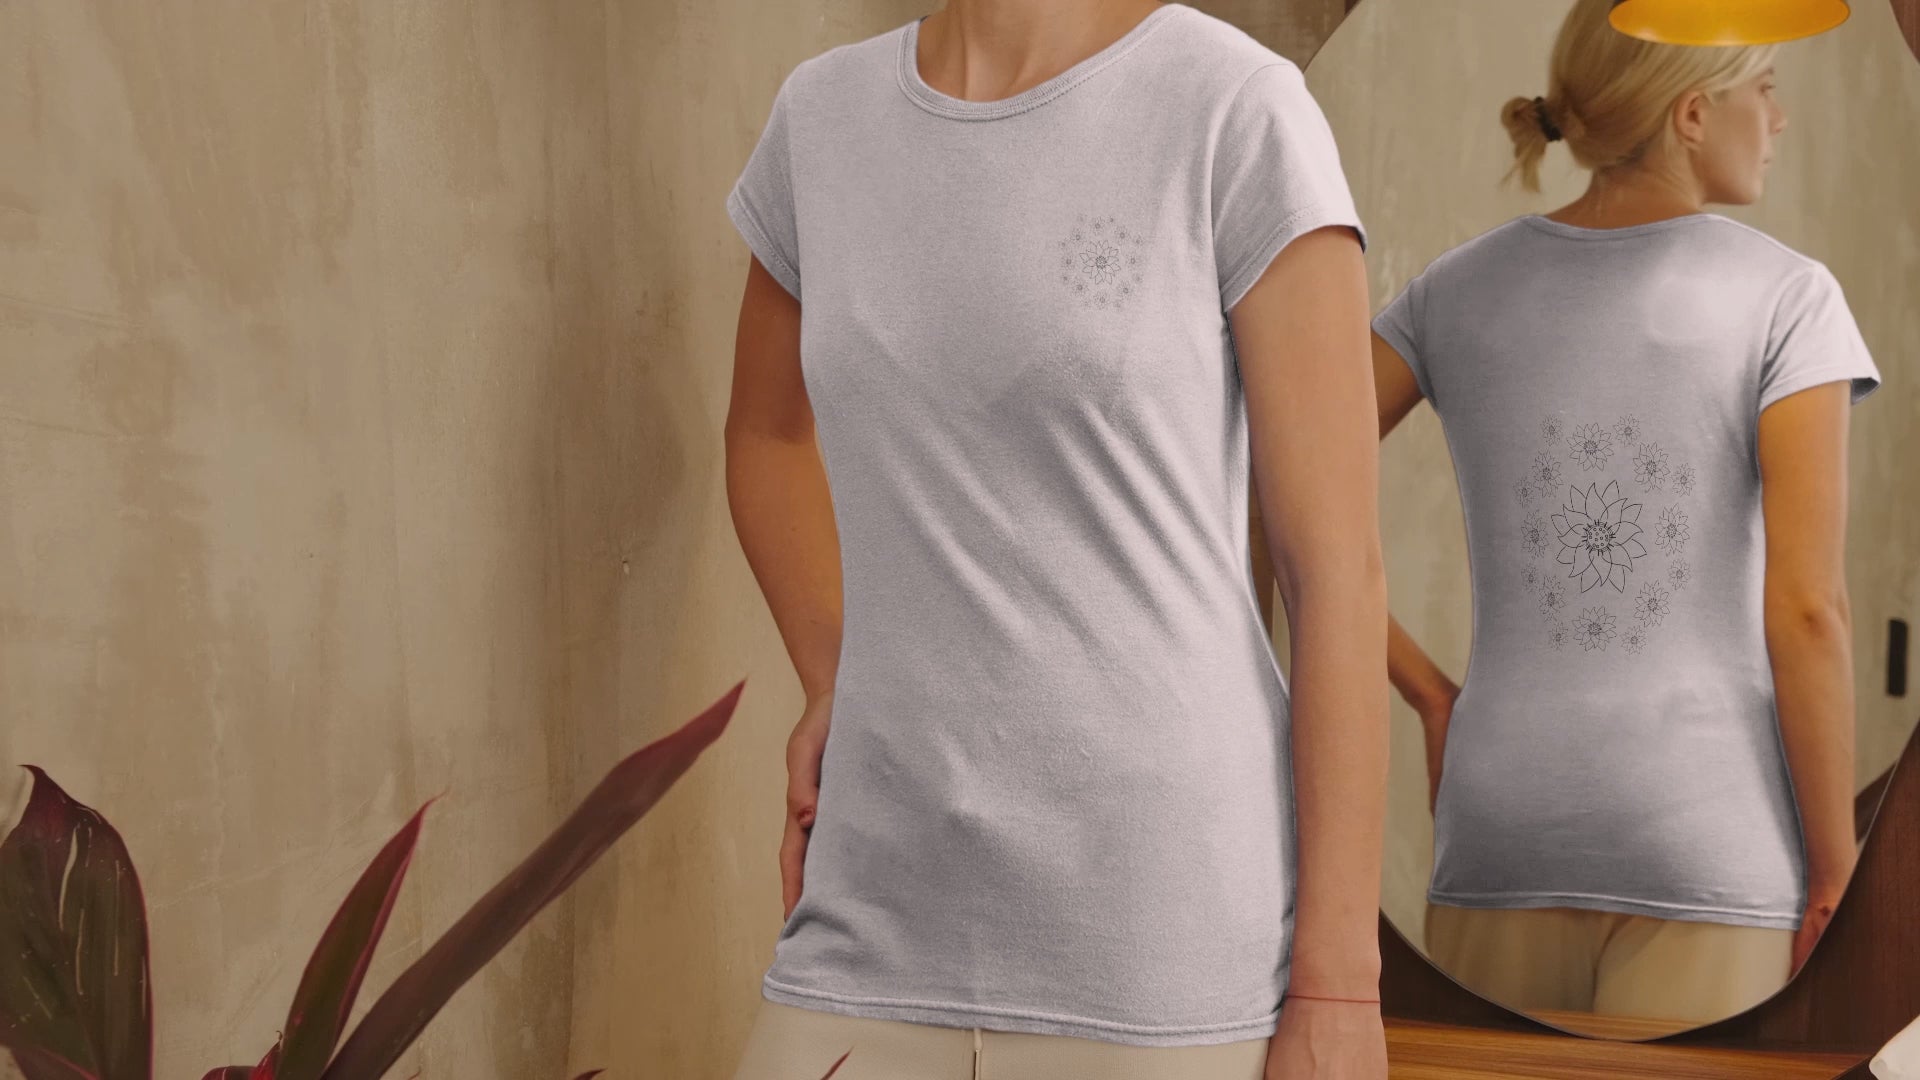 Lotus Dream | 100% Organic Cotton T Shirt worn by a woman in front of a mirror